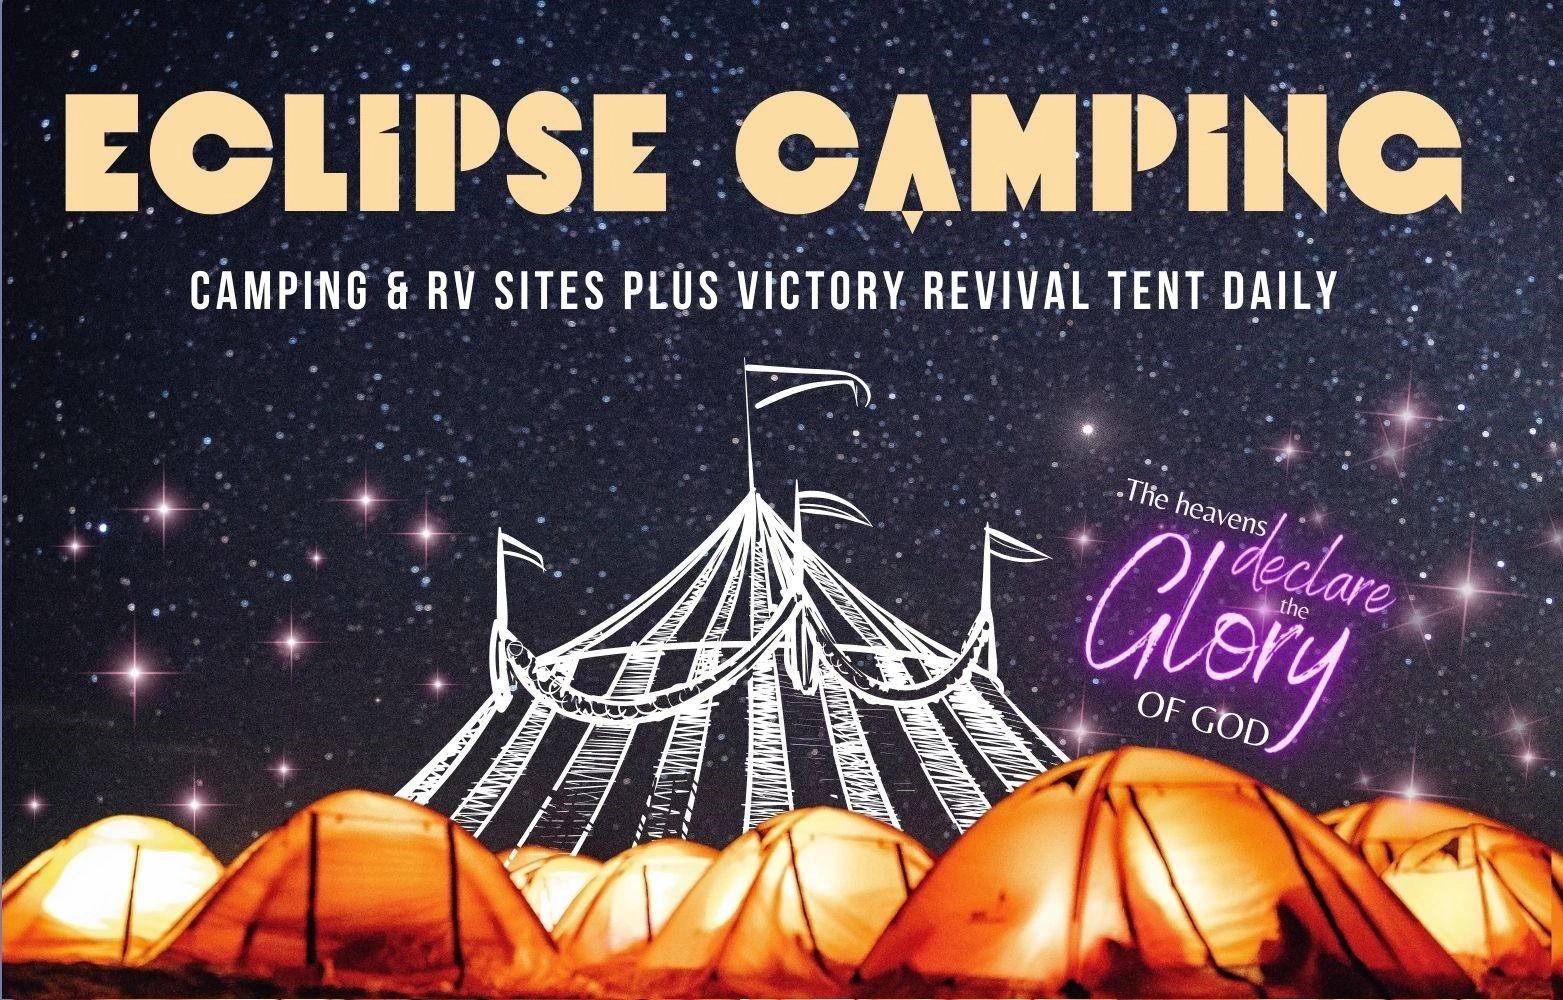 Eclipse camping with RV sites and Victory Revival Tent